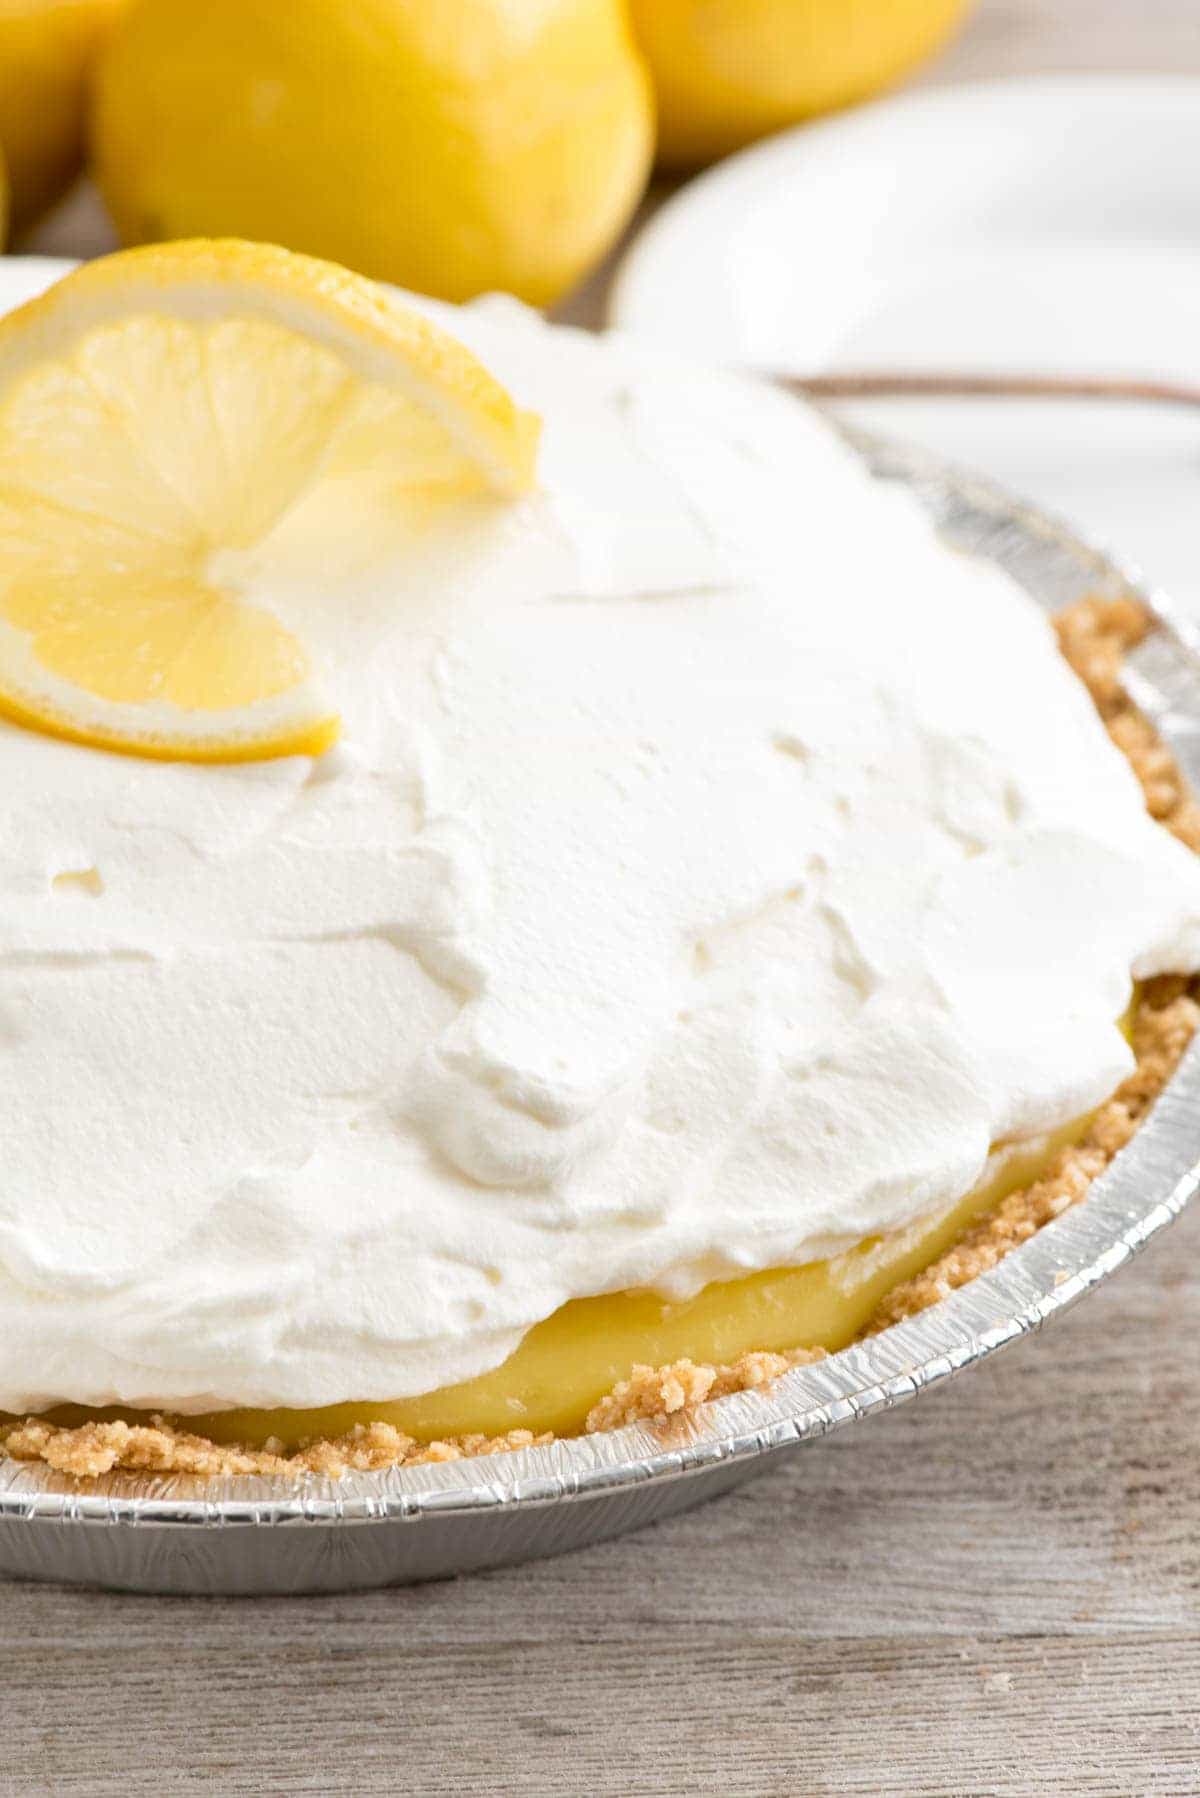 No Bake Lemon Cream Pie - this EASY lemon pie recipe has a homemade graham cracker crust and is filled with lemon and vanilla pudding! It's the EASIEST lemon pie recipe ever!